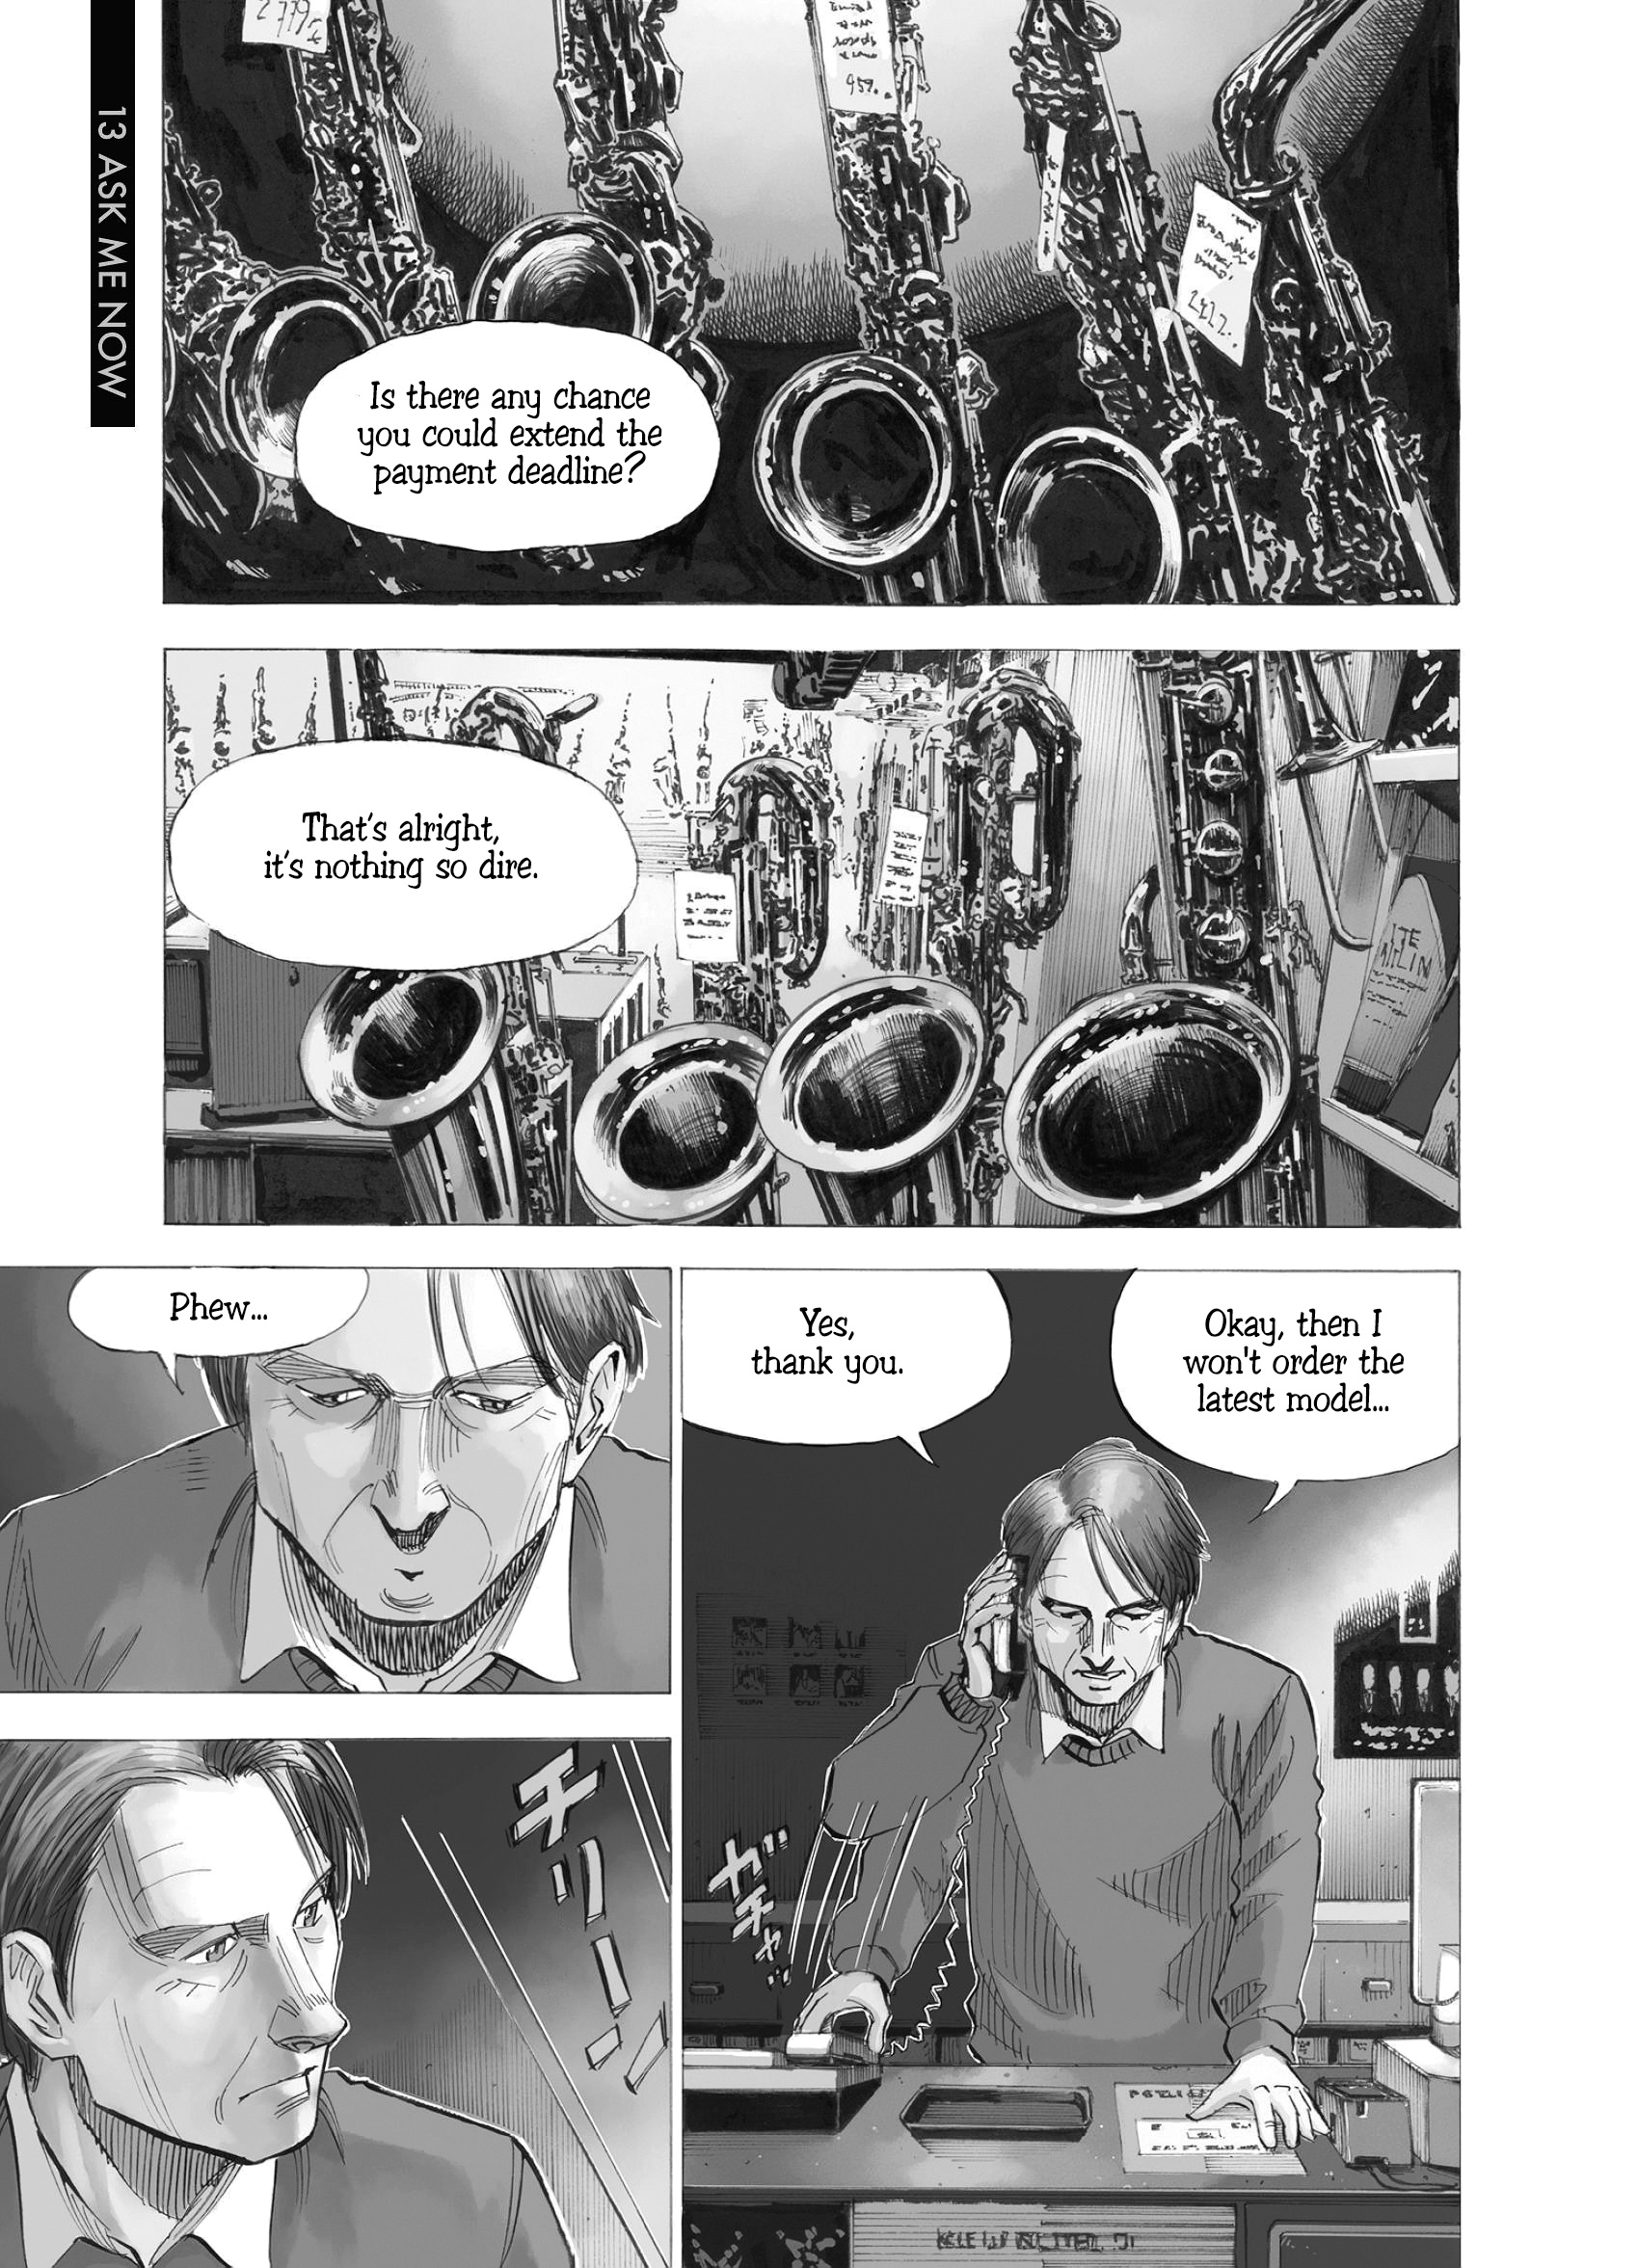 Blue Giant Supreme Vol.2 Chapter 13: Ask Me Now - Picture 1